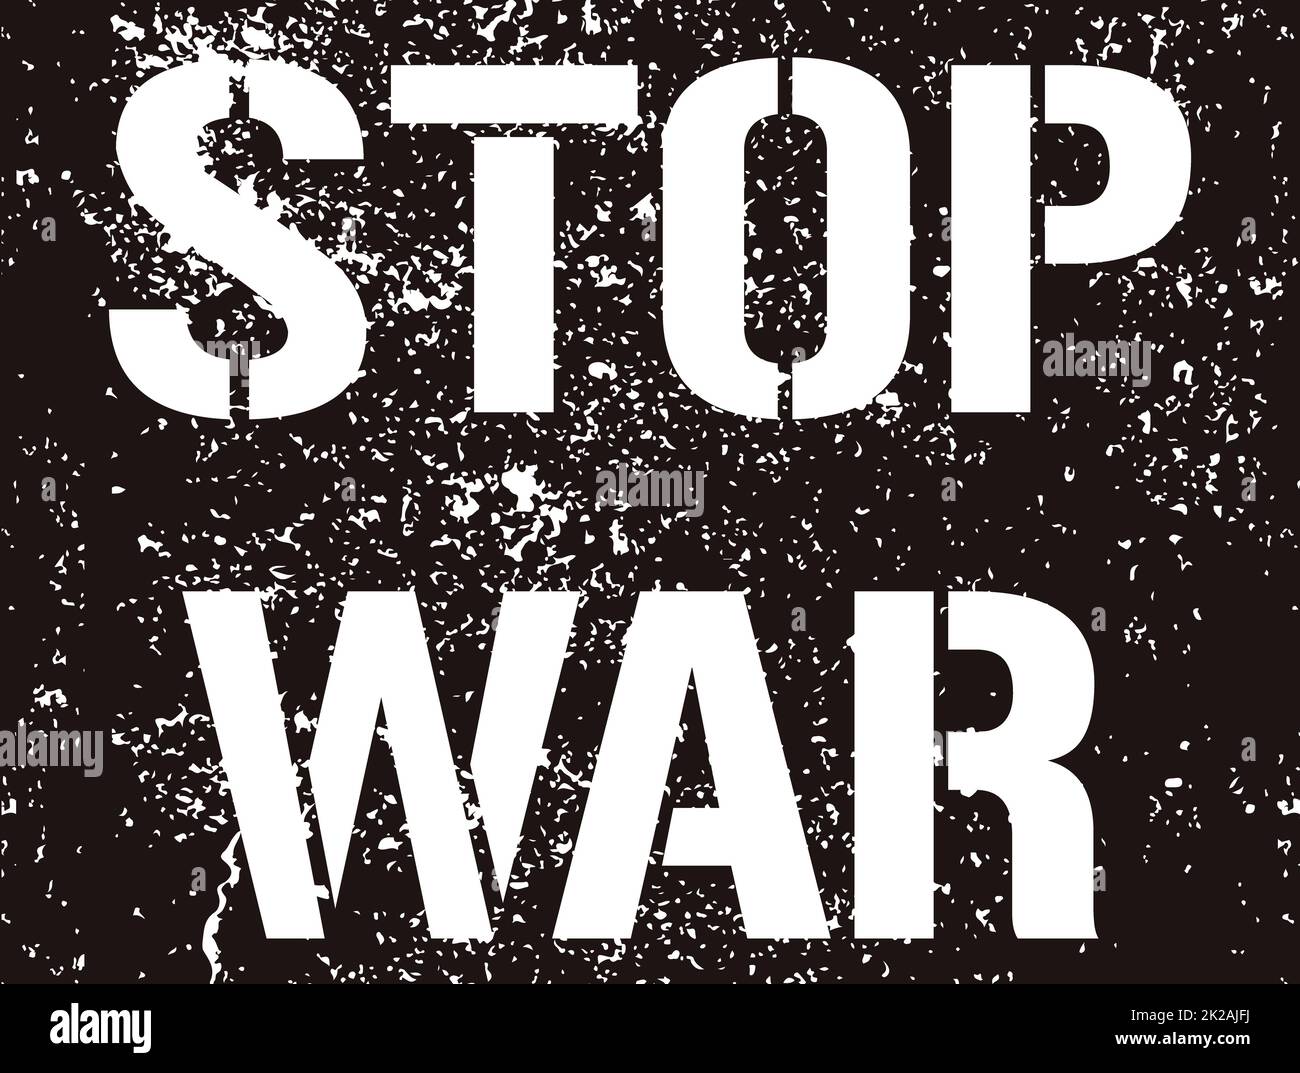 Stop the war - grunge text. Graffiti paint protest sign. A call to stop the war in the world. The armed conflict in Ukraine must be stopped. Stencil - vector illustration. Black peace scratch message. Stock Photo